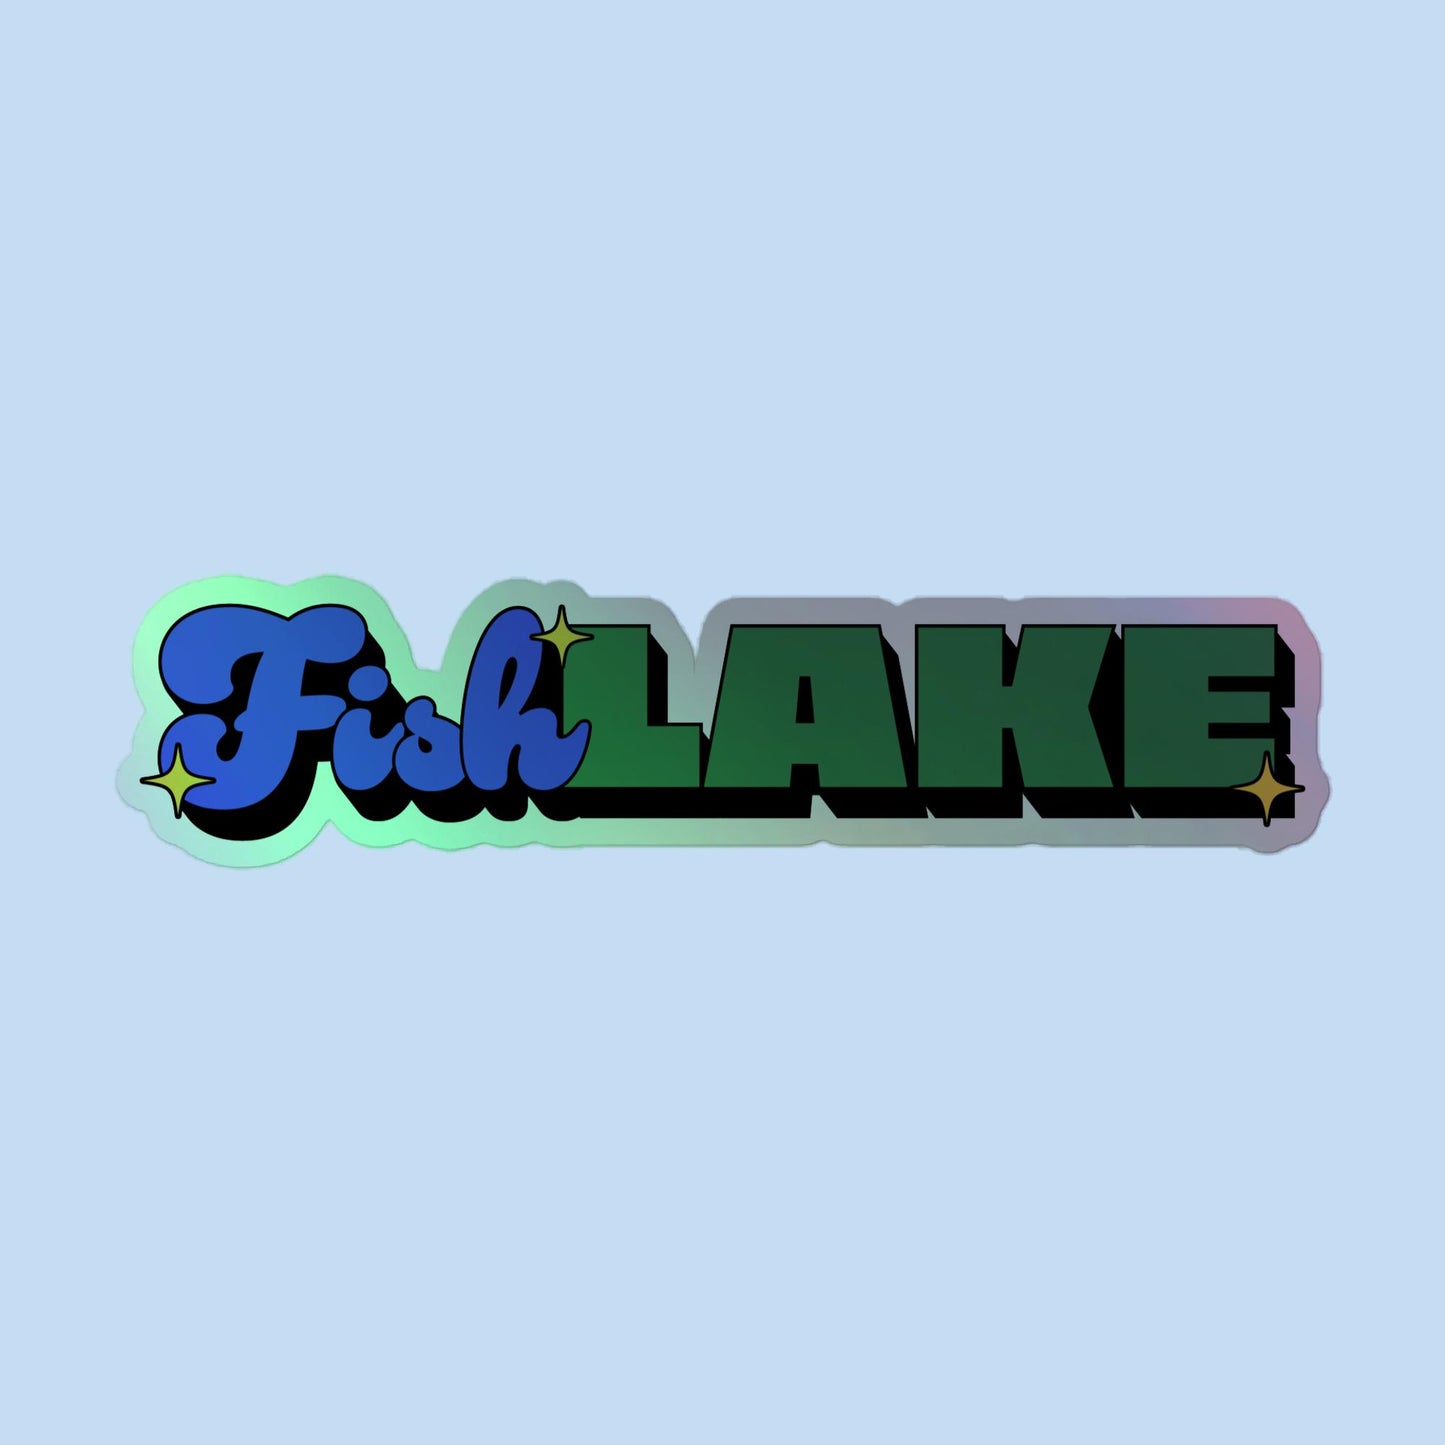 Holographic Fish Lake Sticker - Inspired by Chris Lake & Fisher